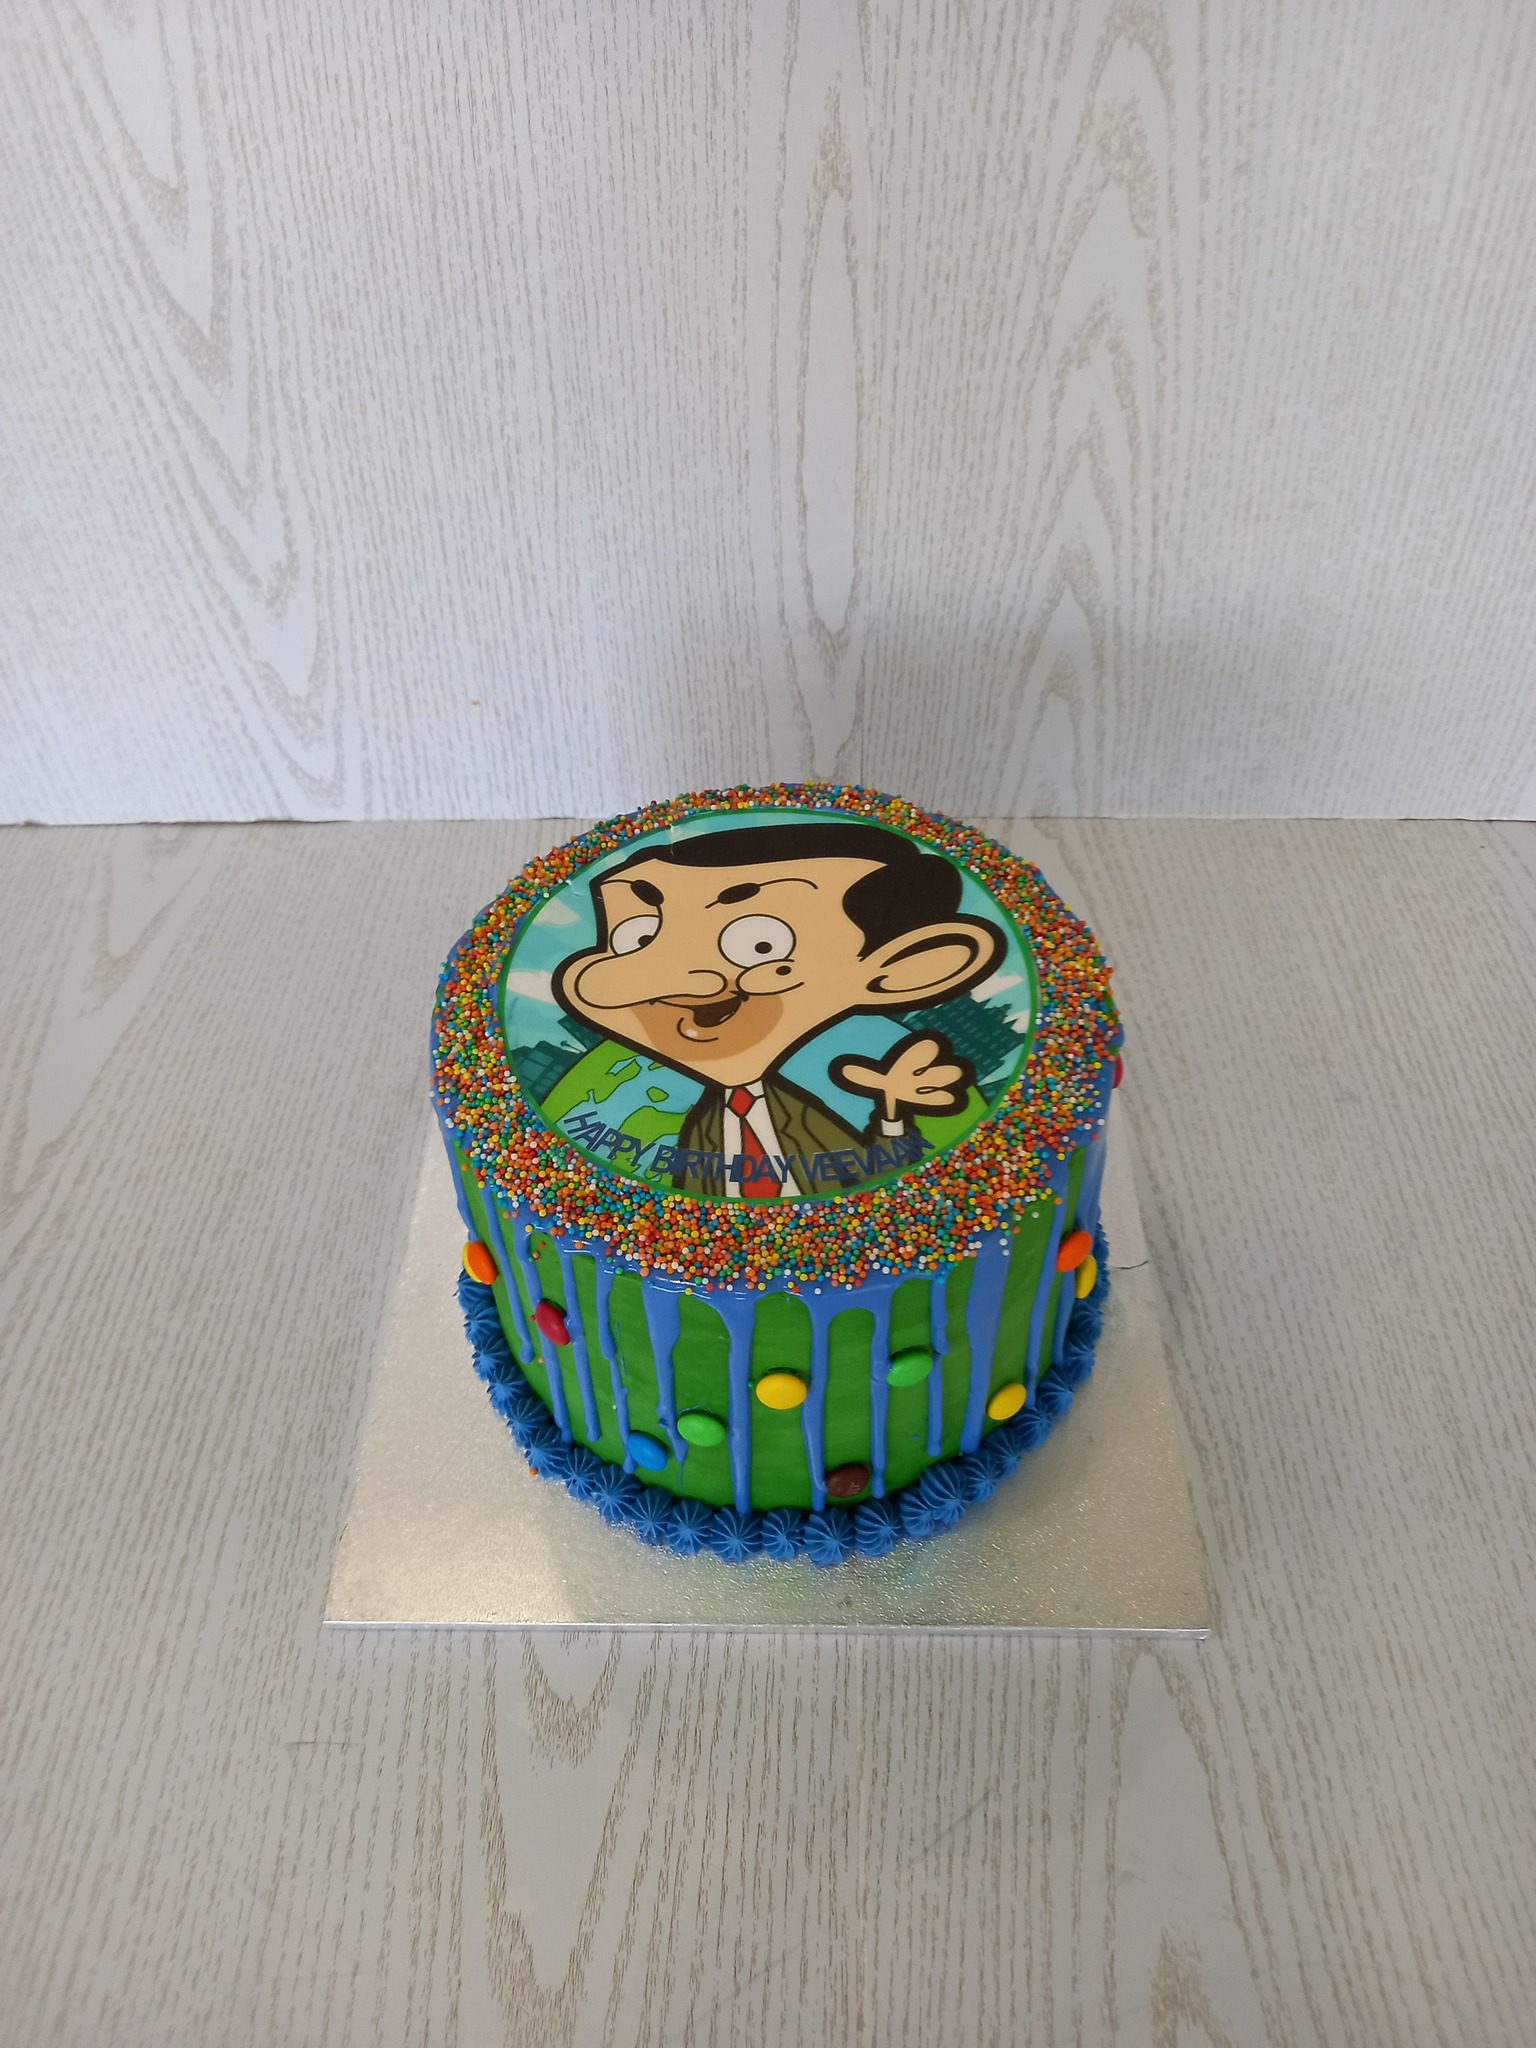 Mr Bean Special Delivery Cake | Baked by Nataleen